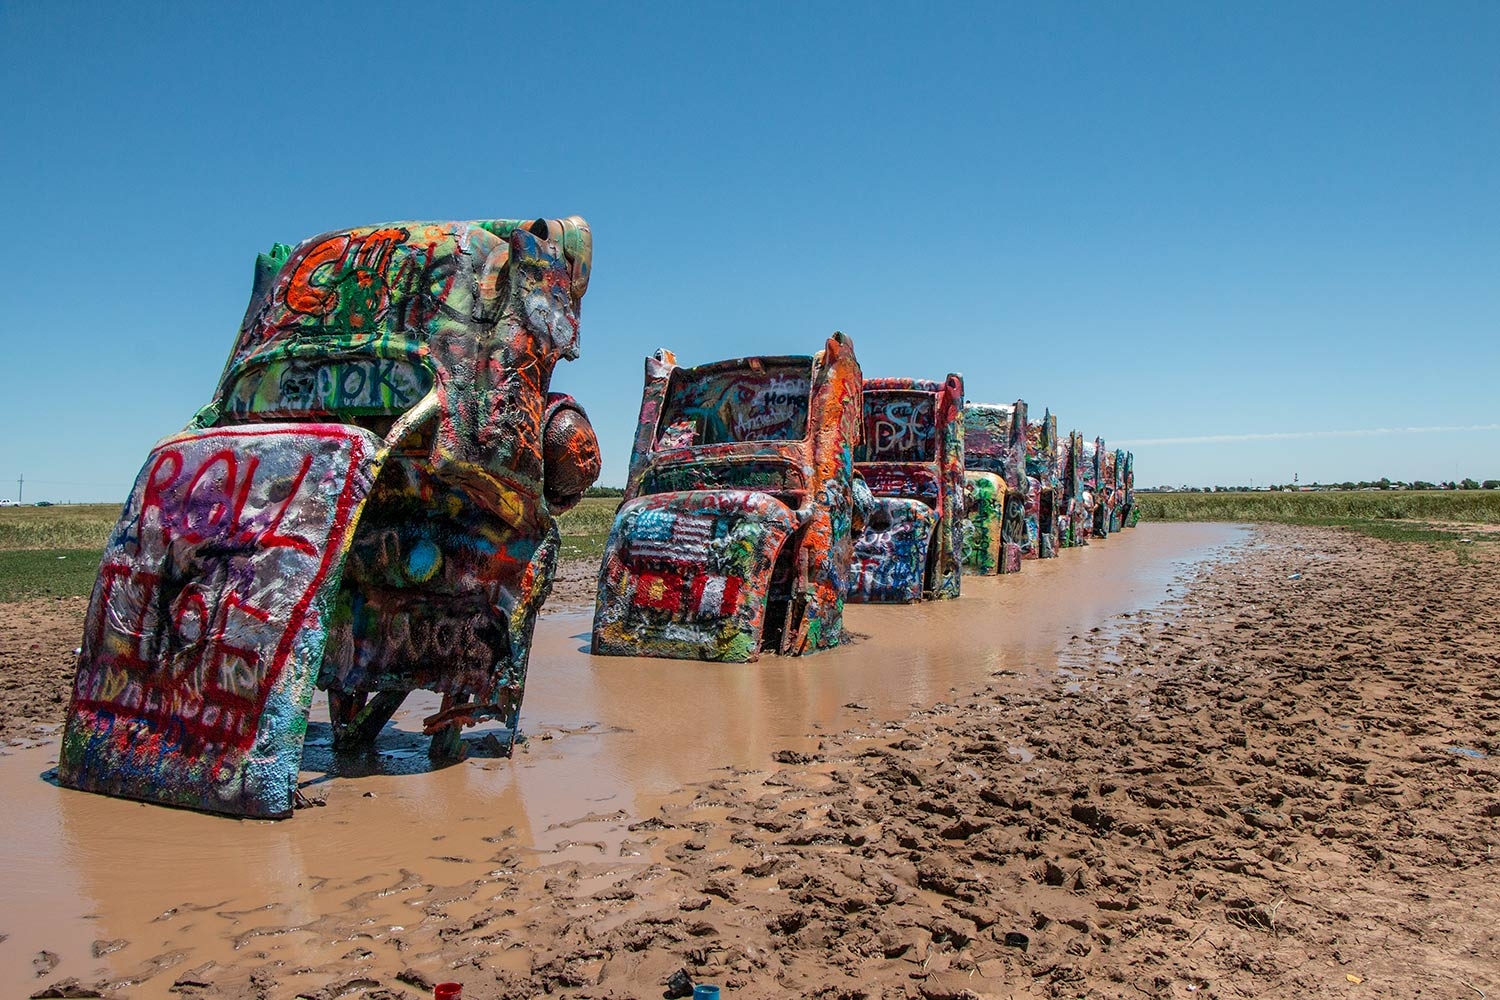 arielkatowice-route-66-cadillac-ranch-ant